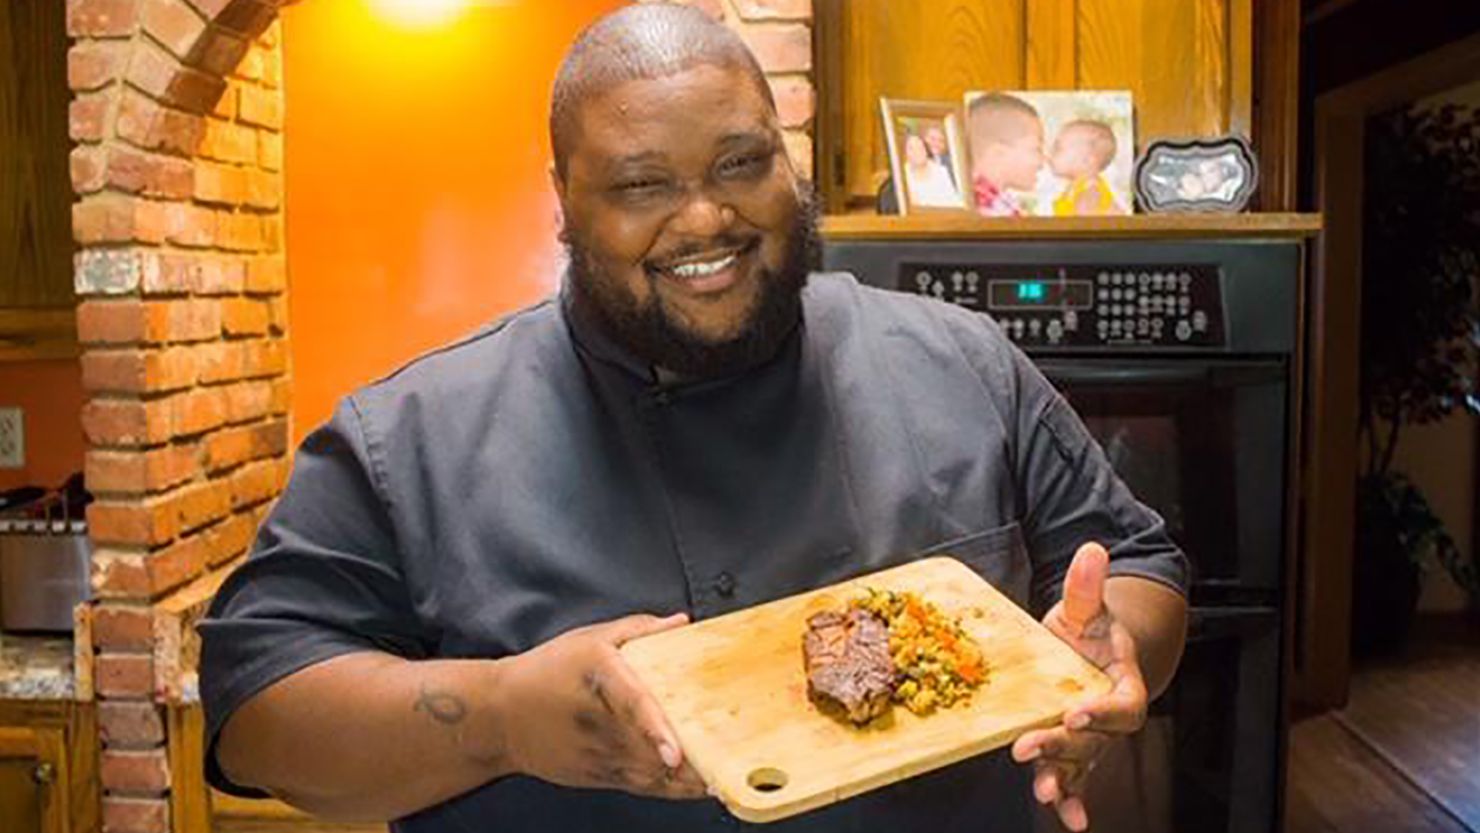 Chef Sean Gilliam, preparing meals for federal workers affected by the shutdown: "I'm the kind of guy who just wants to get in the kitchen and help."